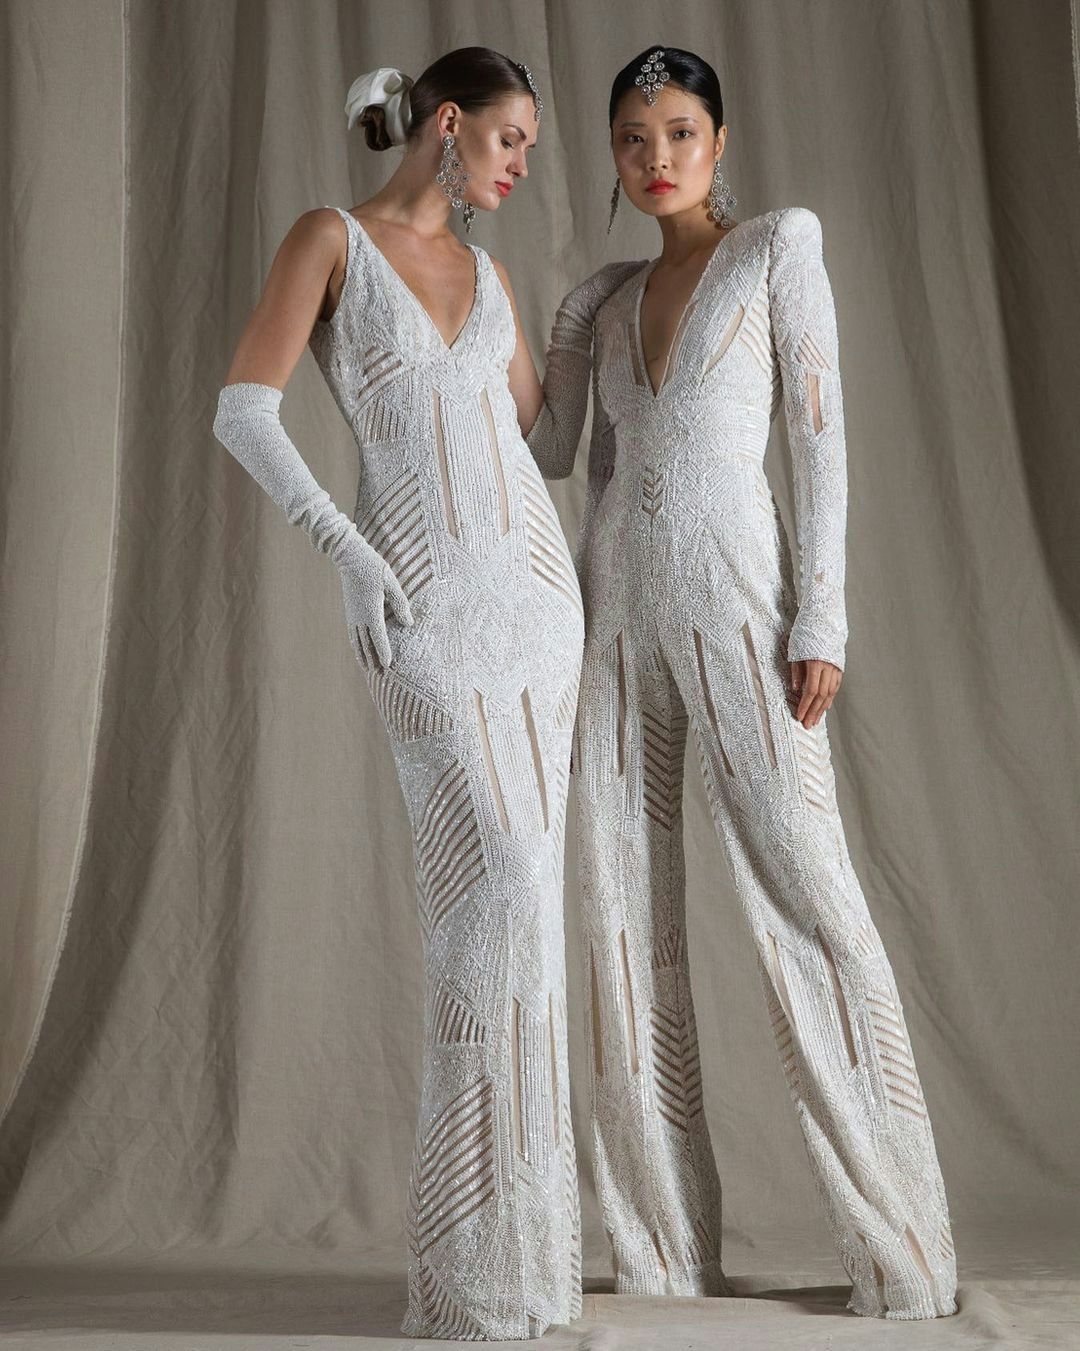 Two brides, one wearing a dress, one wearing a jumpsuit 